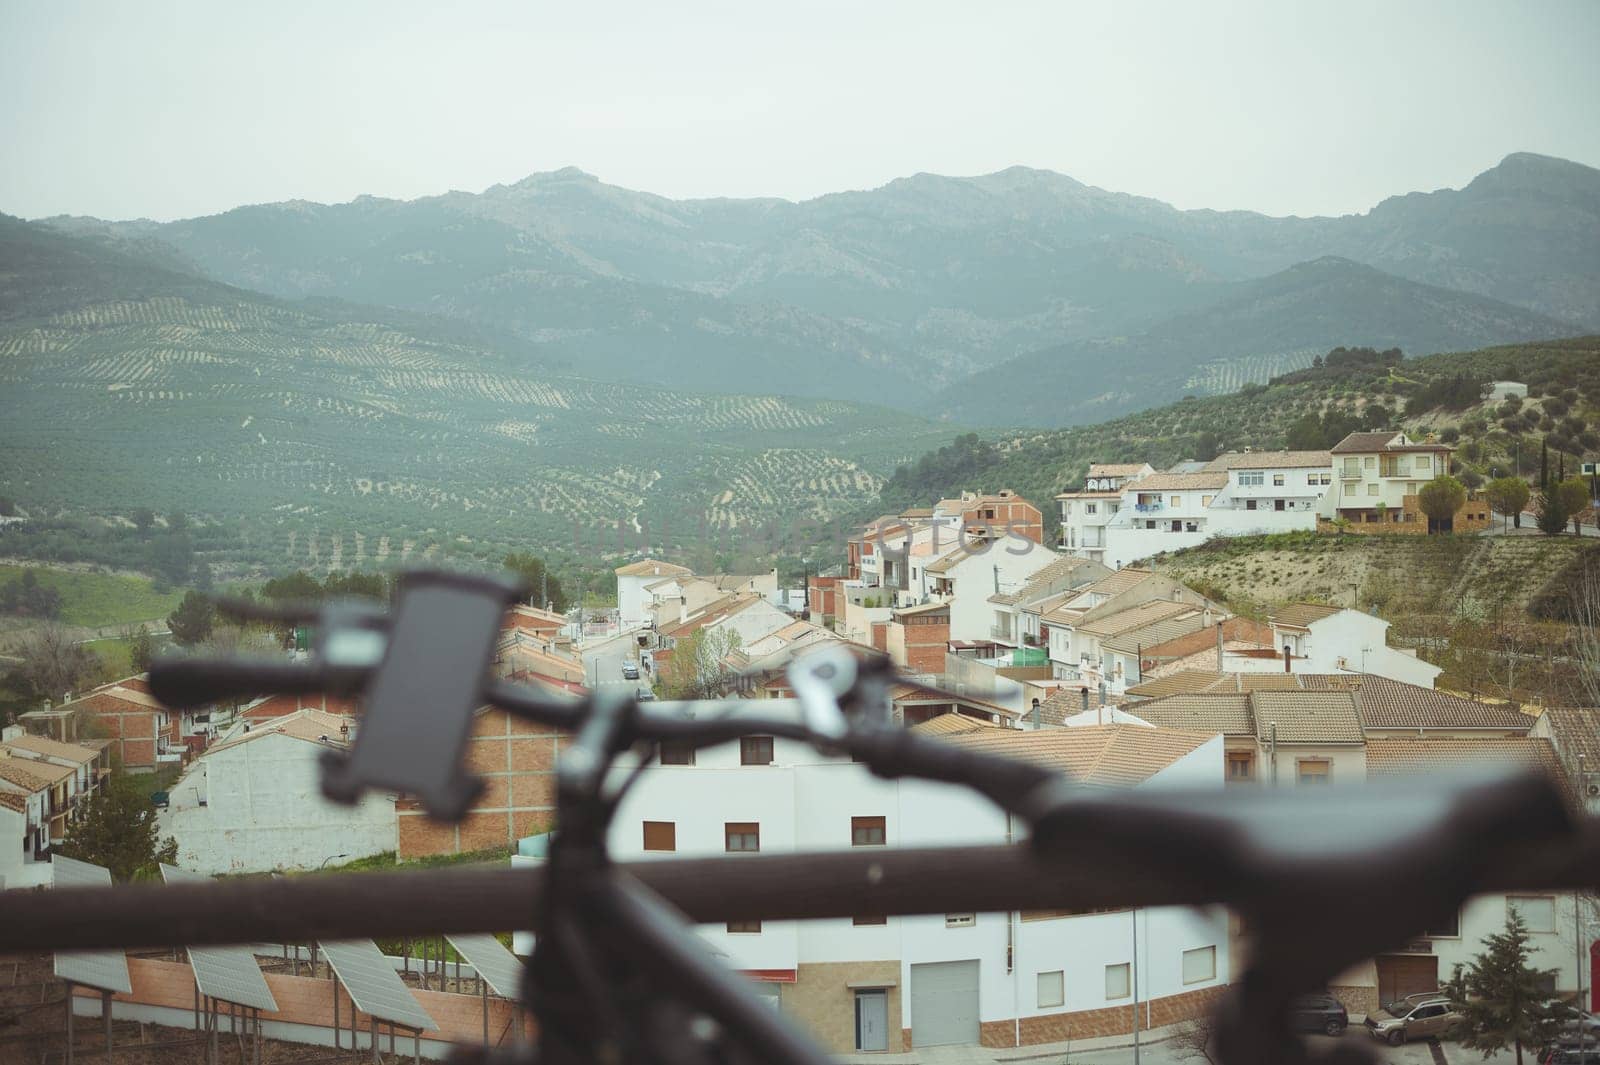 View through a blurred handlebar of an electric motor bike to a beautiful medieval city or village in mountains in Spain. E-bicycle - eco friendly mode of transportation. Bike sharing city service